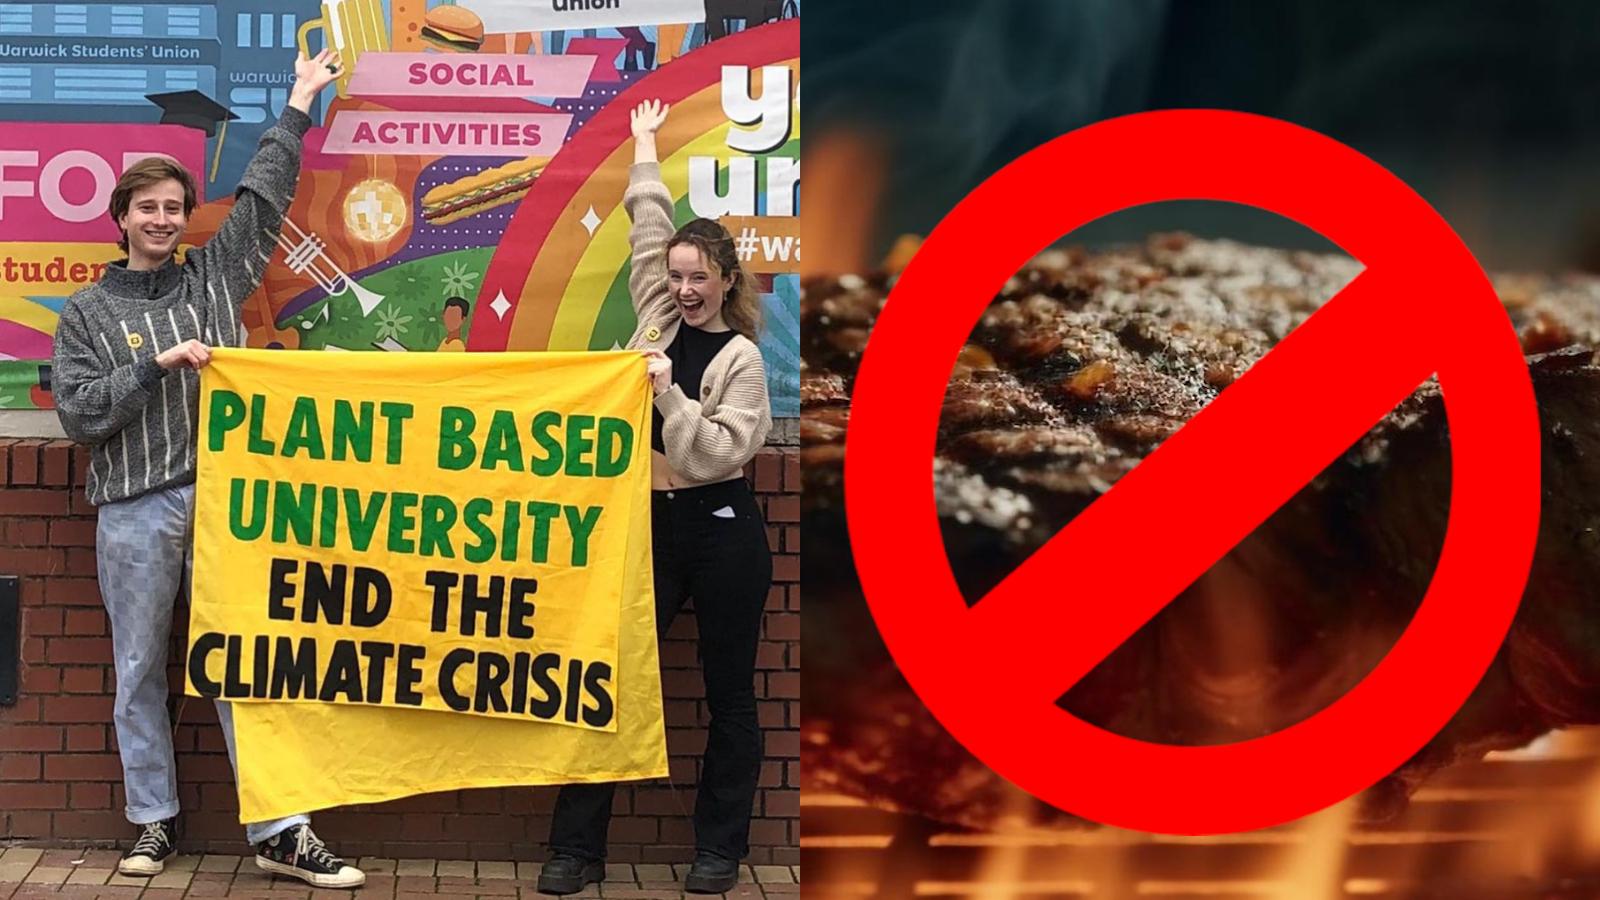 students vote to ban meat and go full plant-based at university